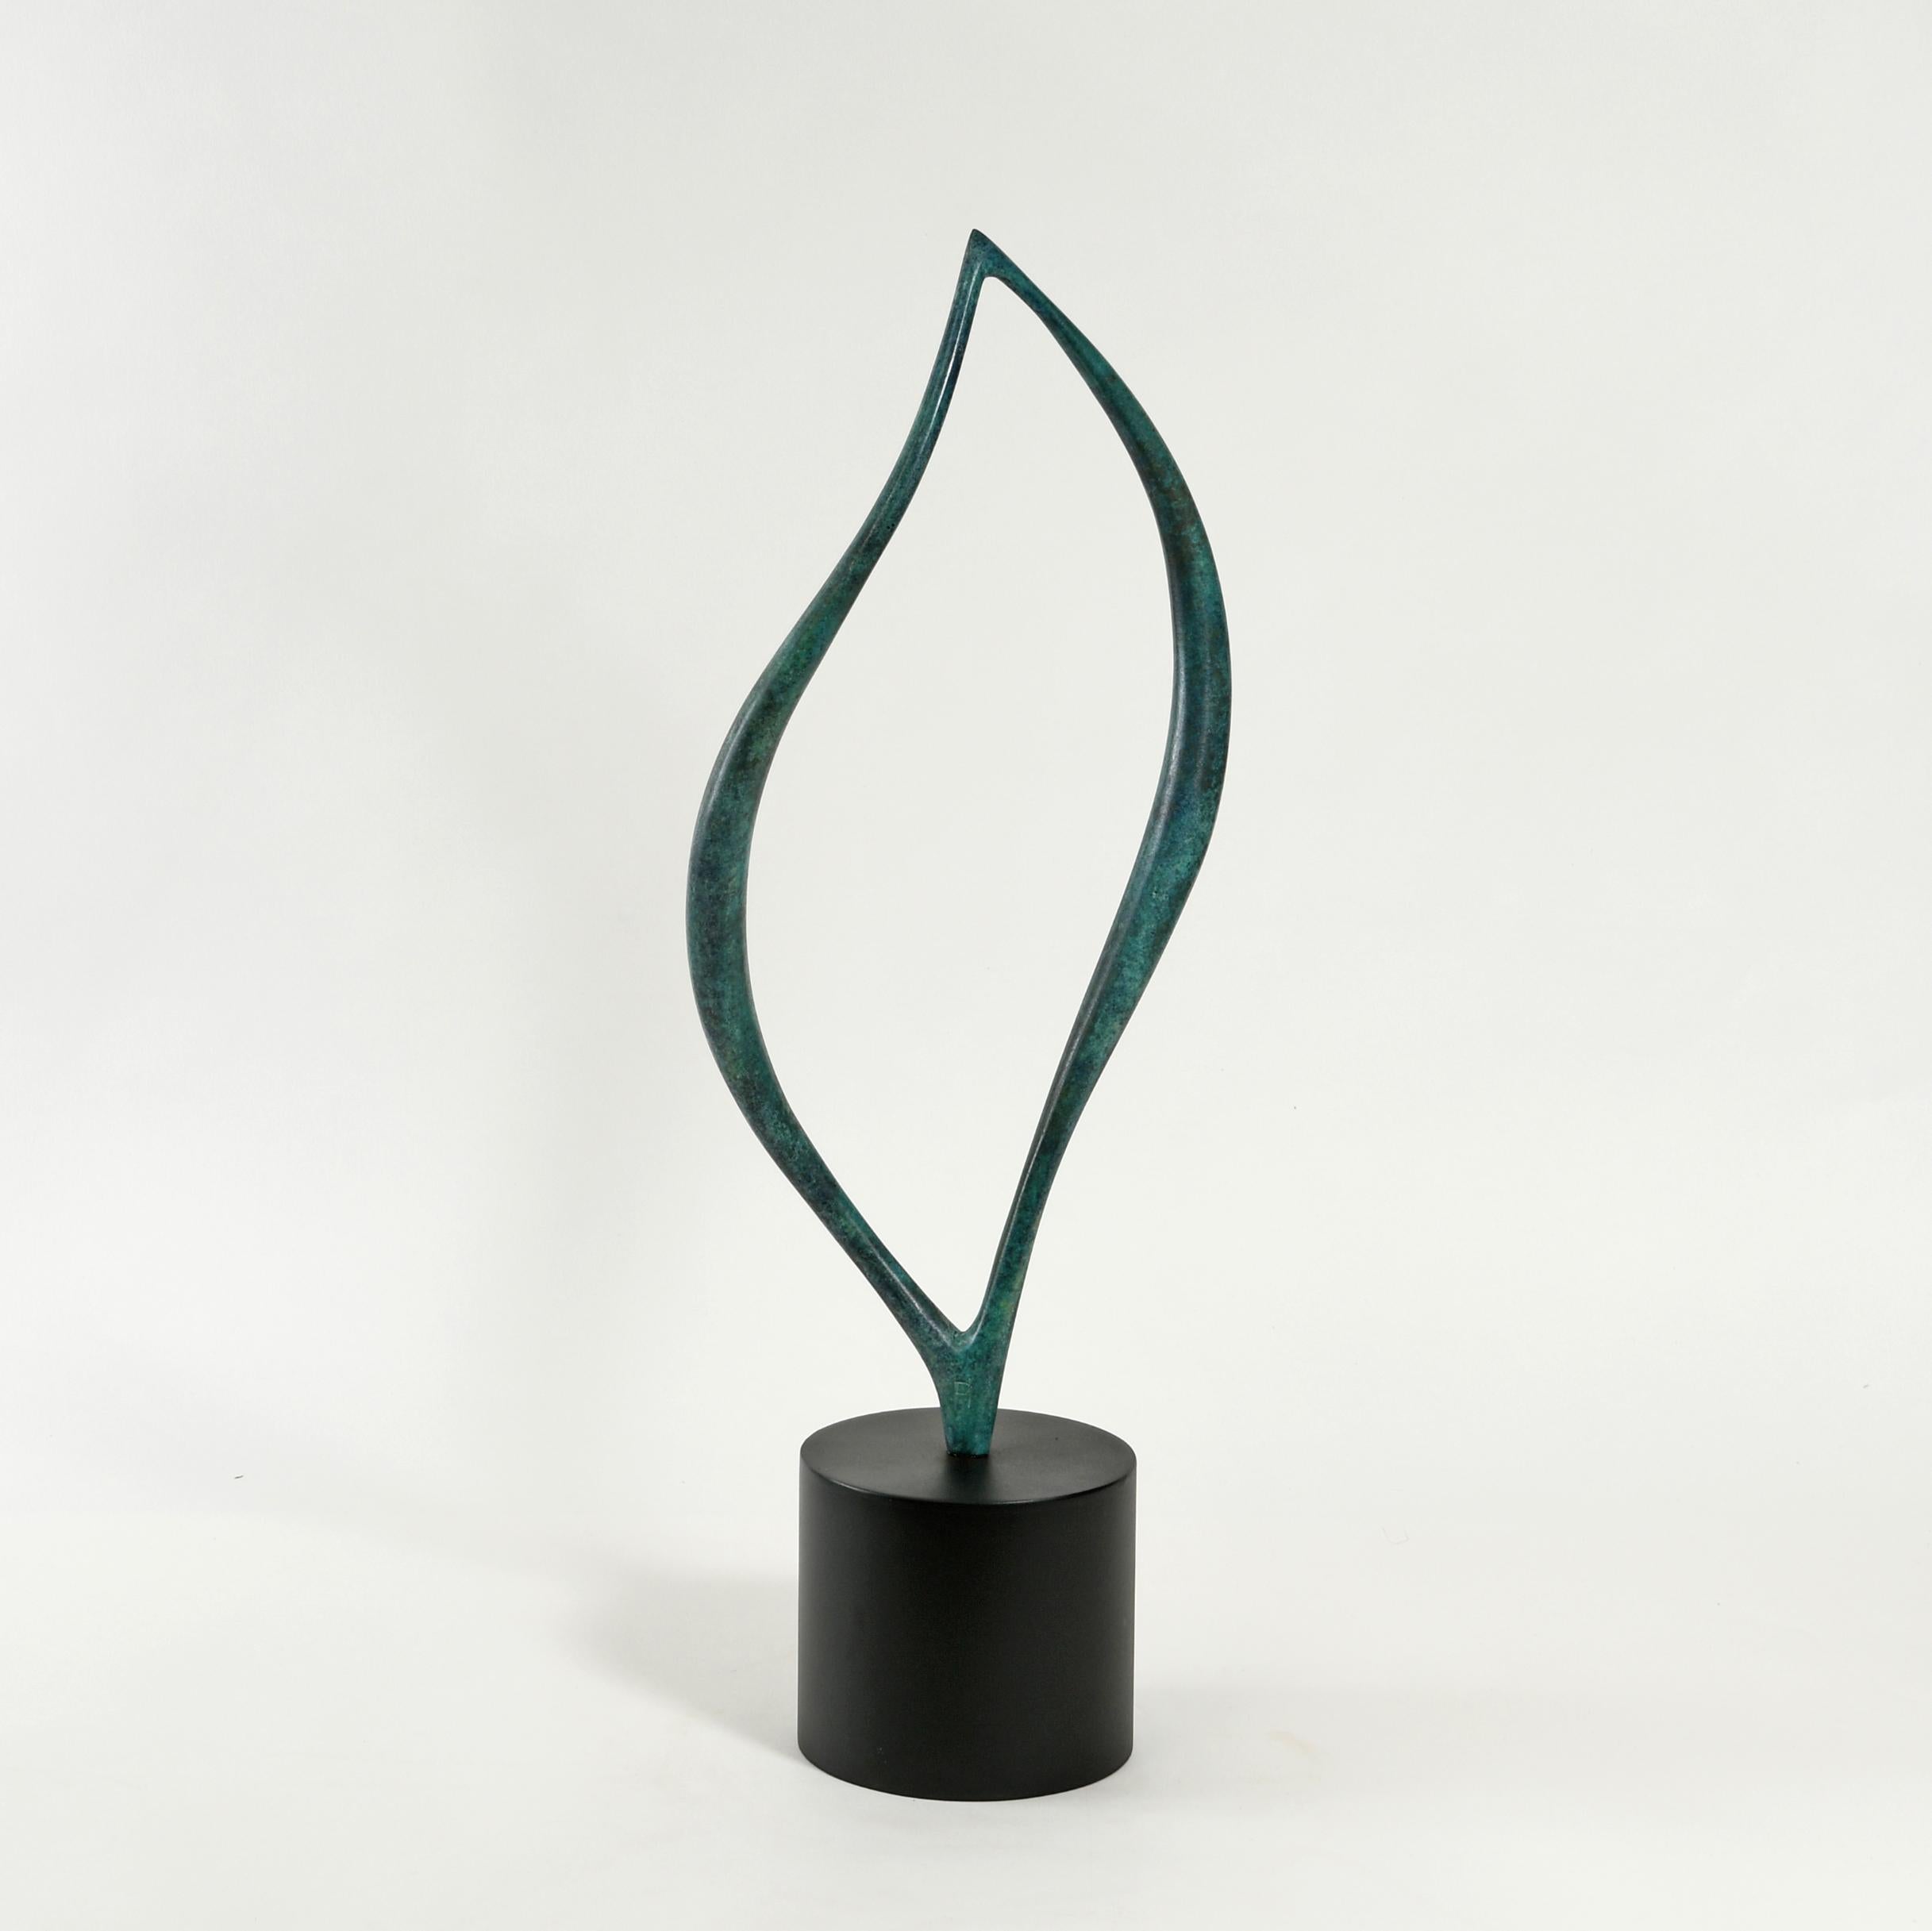 Bronze freely rotating on a painted steel base.
Edition of 9 variations
Stamped with monogram signature and uniquely numbered 458, 2/9
The asymmetrical form of the bronze presents a variety of aspects which are seen by moving round the sculpture or